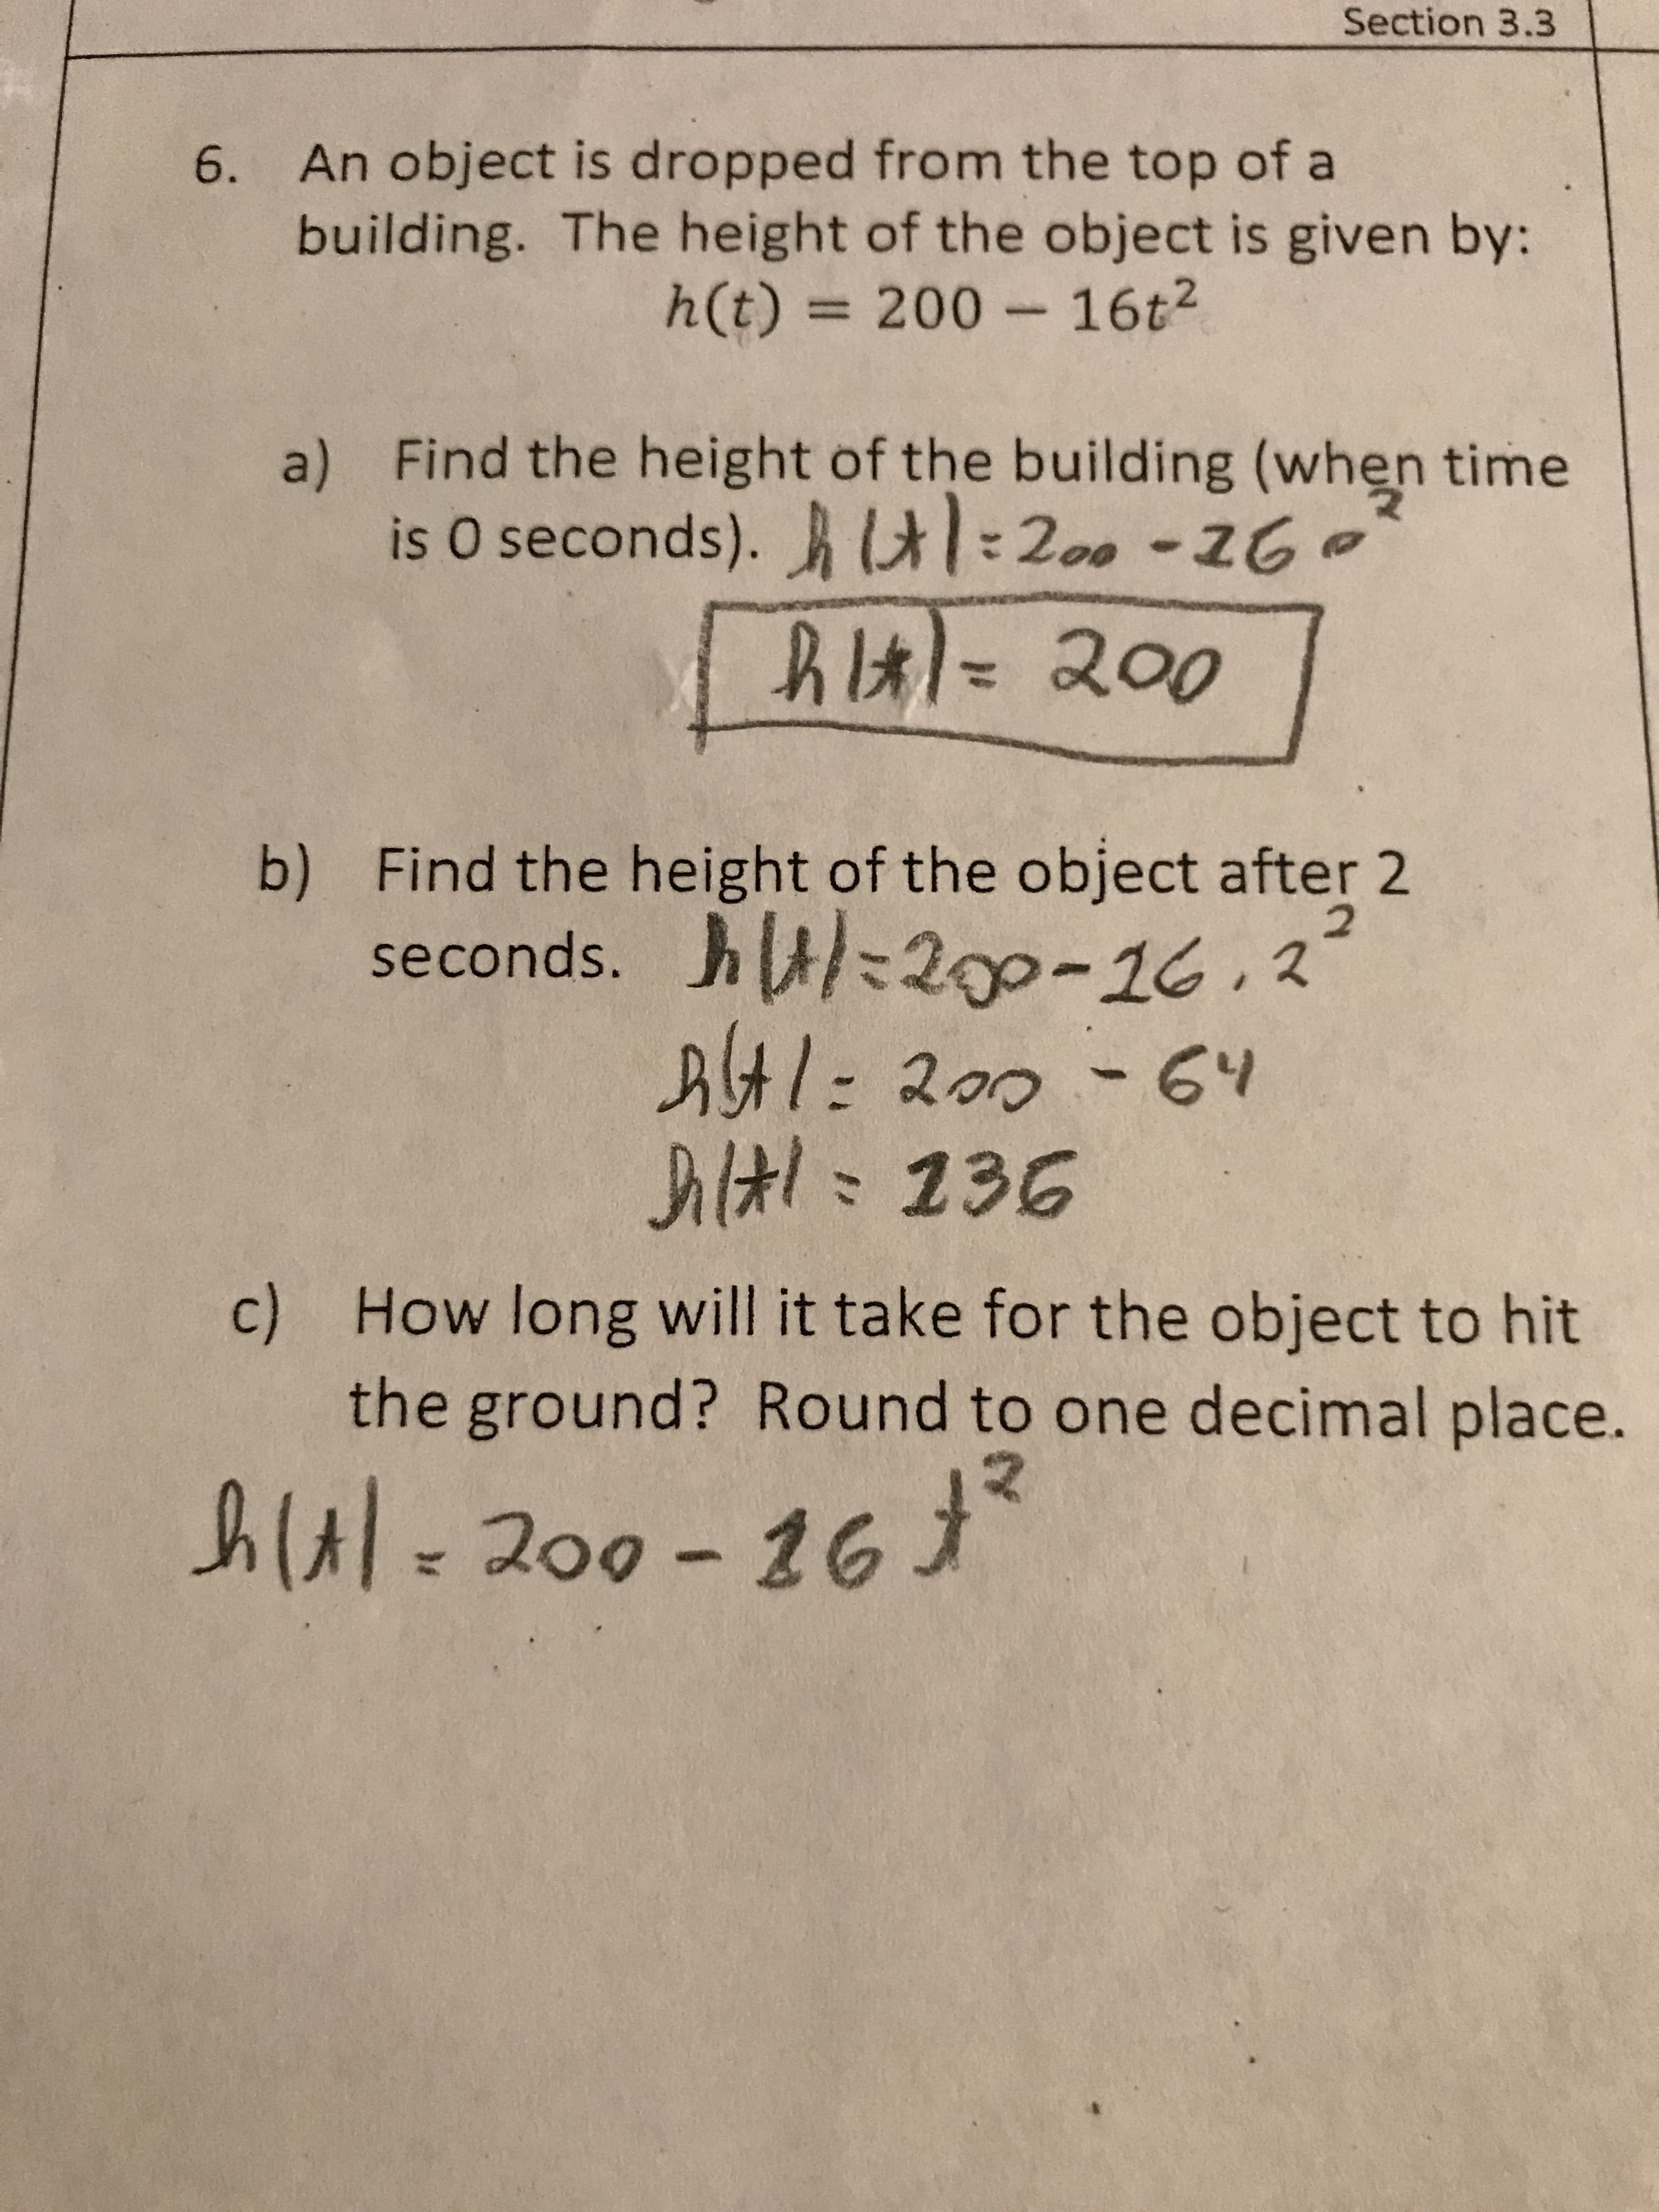 Section 3.3
6. An object is dropped from the top of a
building. The height of the object is given by:
h(t) 200 16t2
a) Find the height of the building (when time
is O seconds). 200-2G
f
hil200
b) Find the height of the object after 2
seconds. h 200-16.2
At1: 200-64
l236
2
How long will it take for the object to hit
c)
the ground? Round to one decimal place.
-200-16
